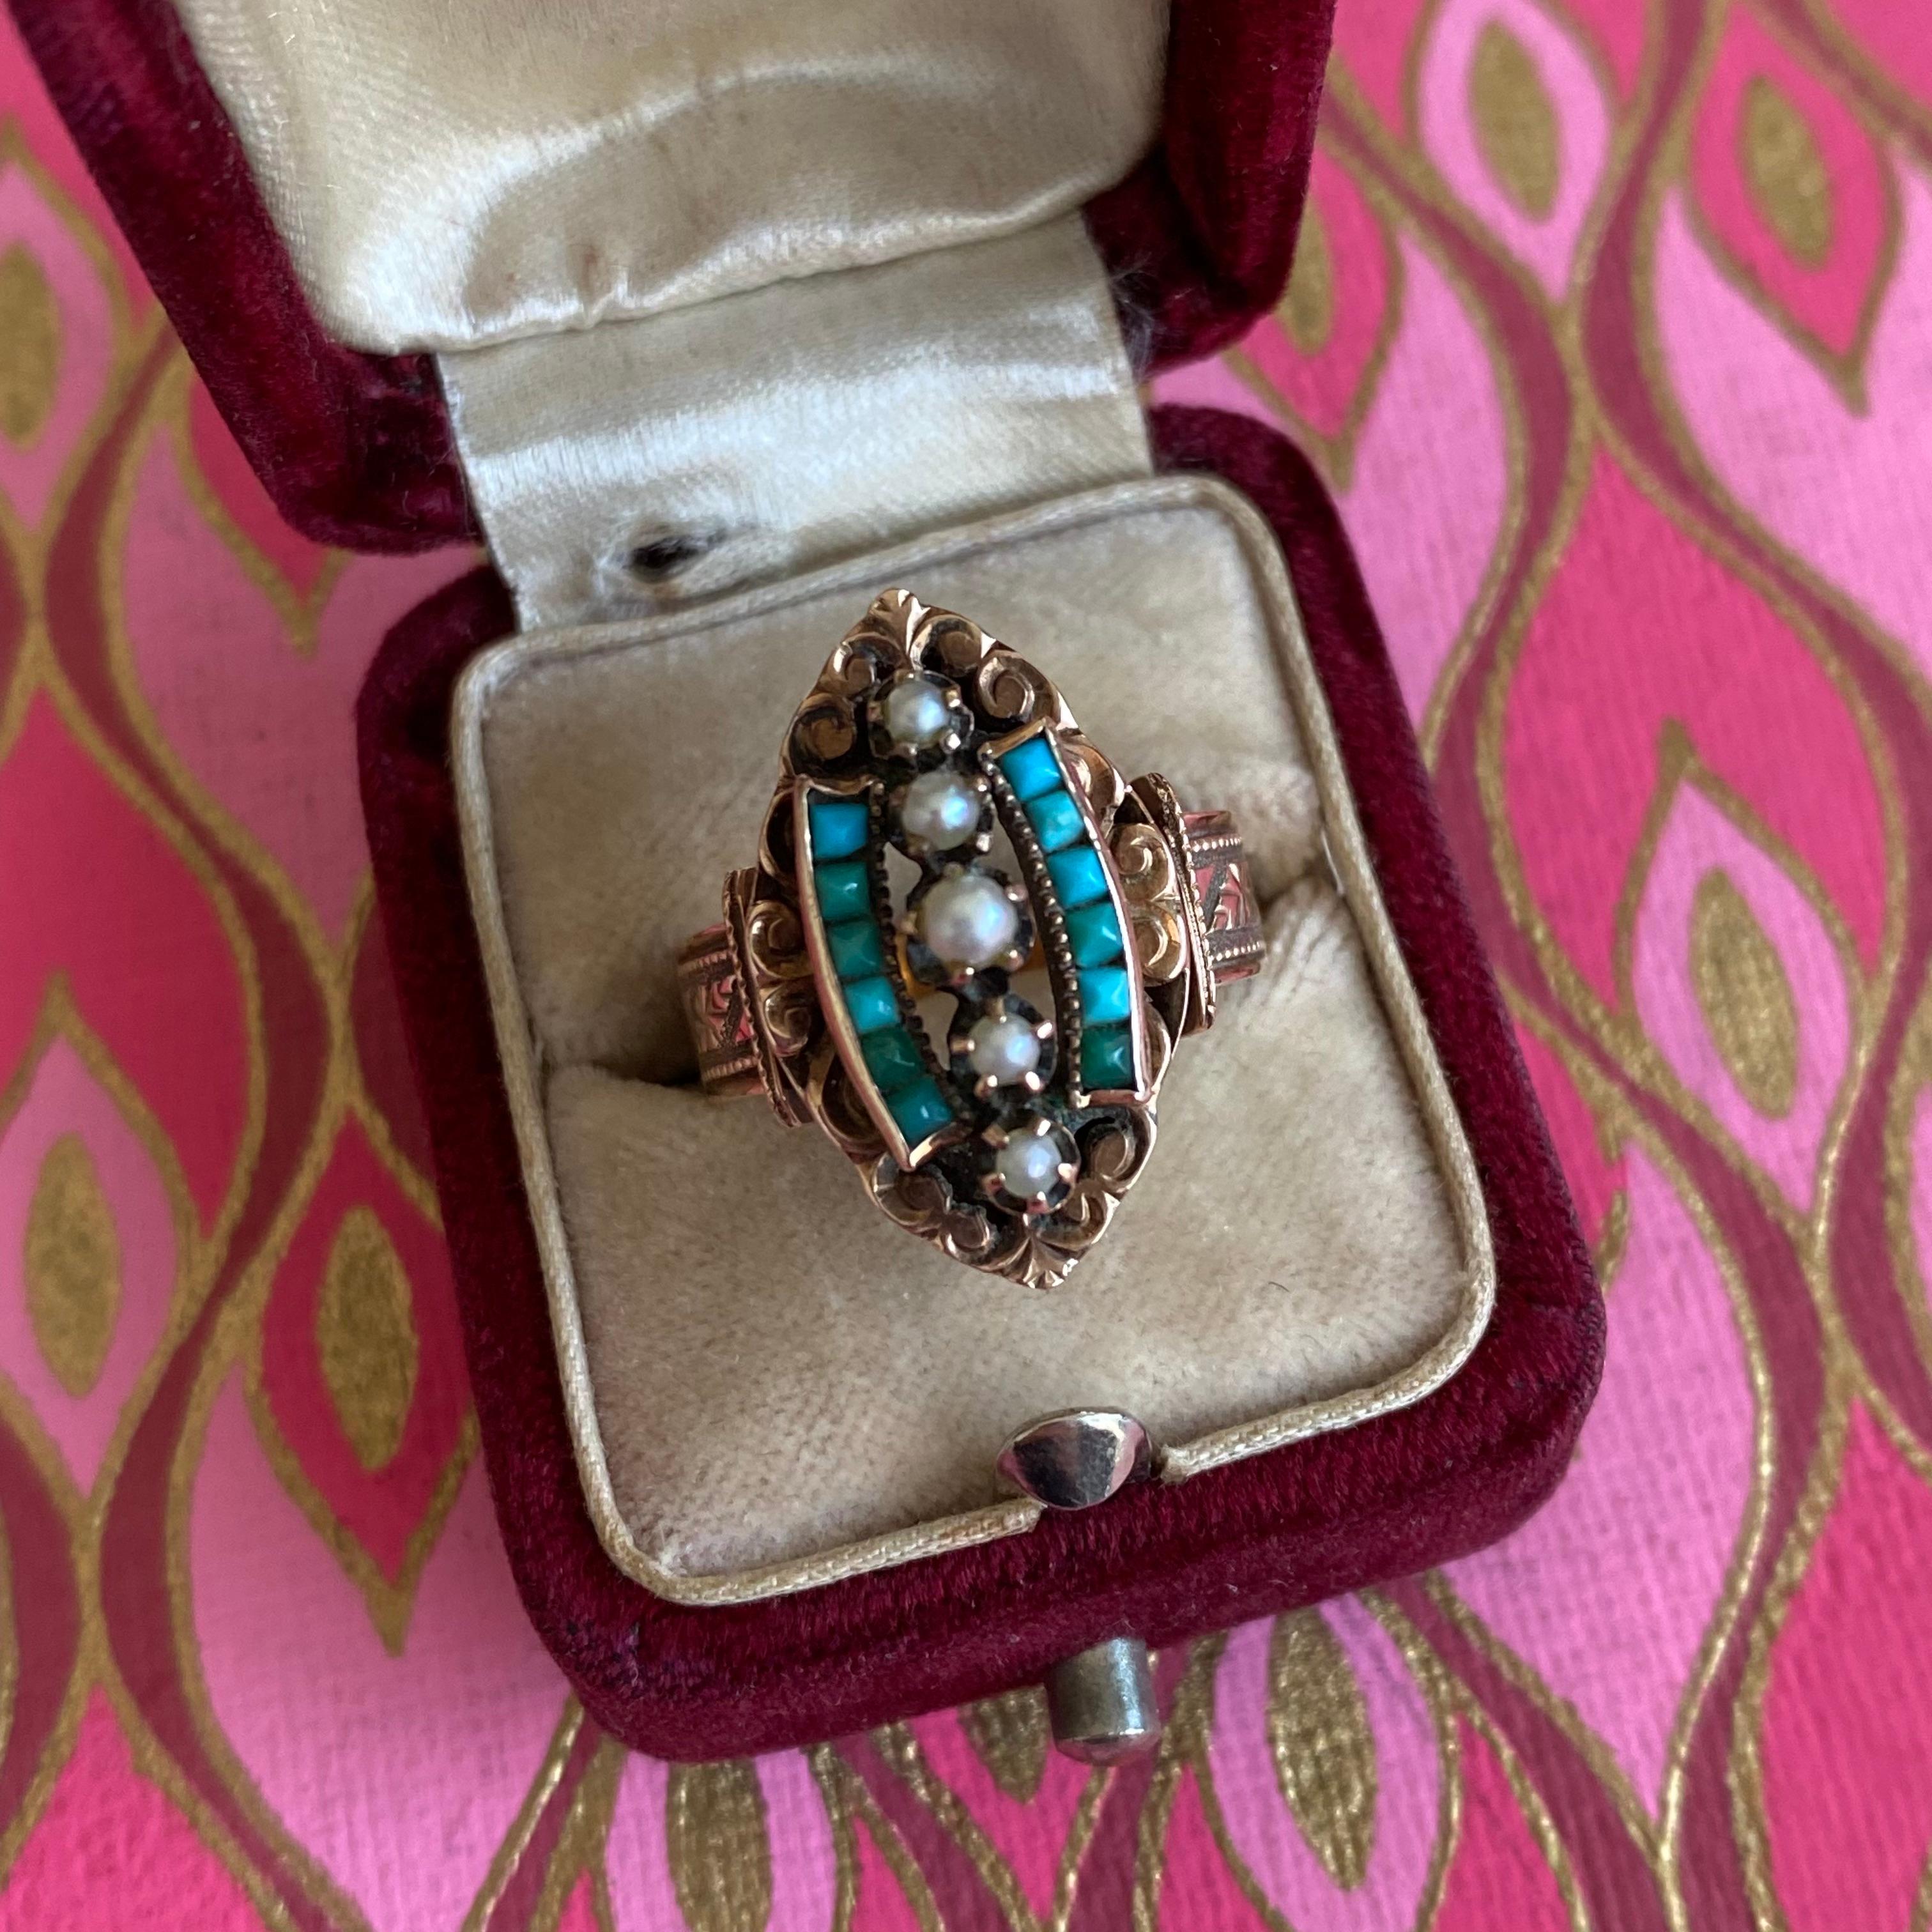 Details:
Absolutely stunning Victorian ring believed to be American made circa 1895. A very beautiful ring with 14K rose gold with 5 prong set seed pearls, and calibre cut turquoise. This piece is unique, and really not to be missed! The band